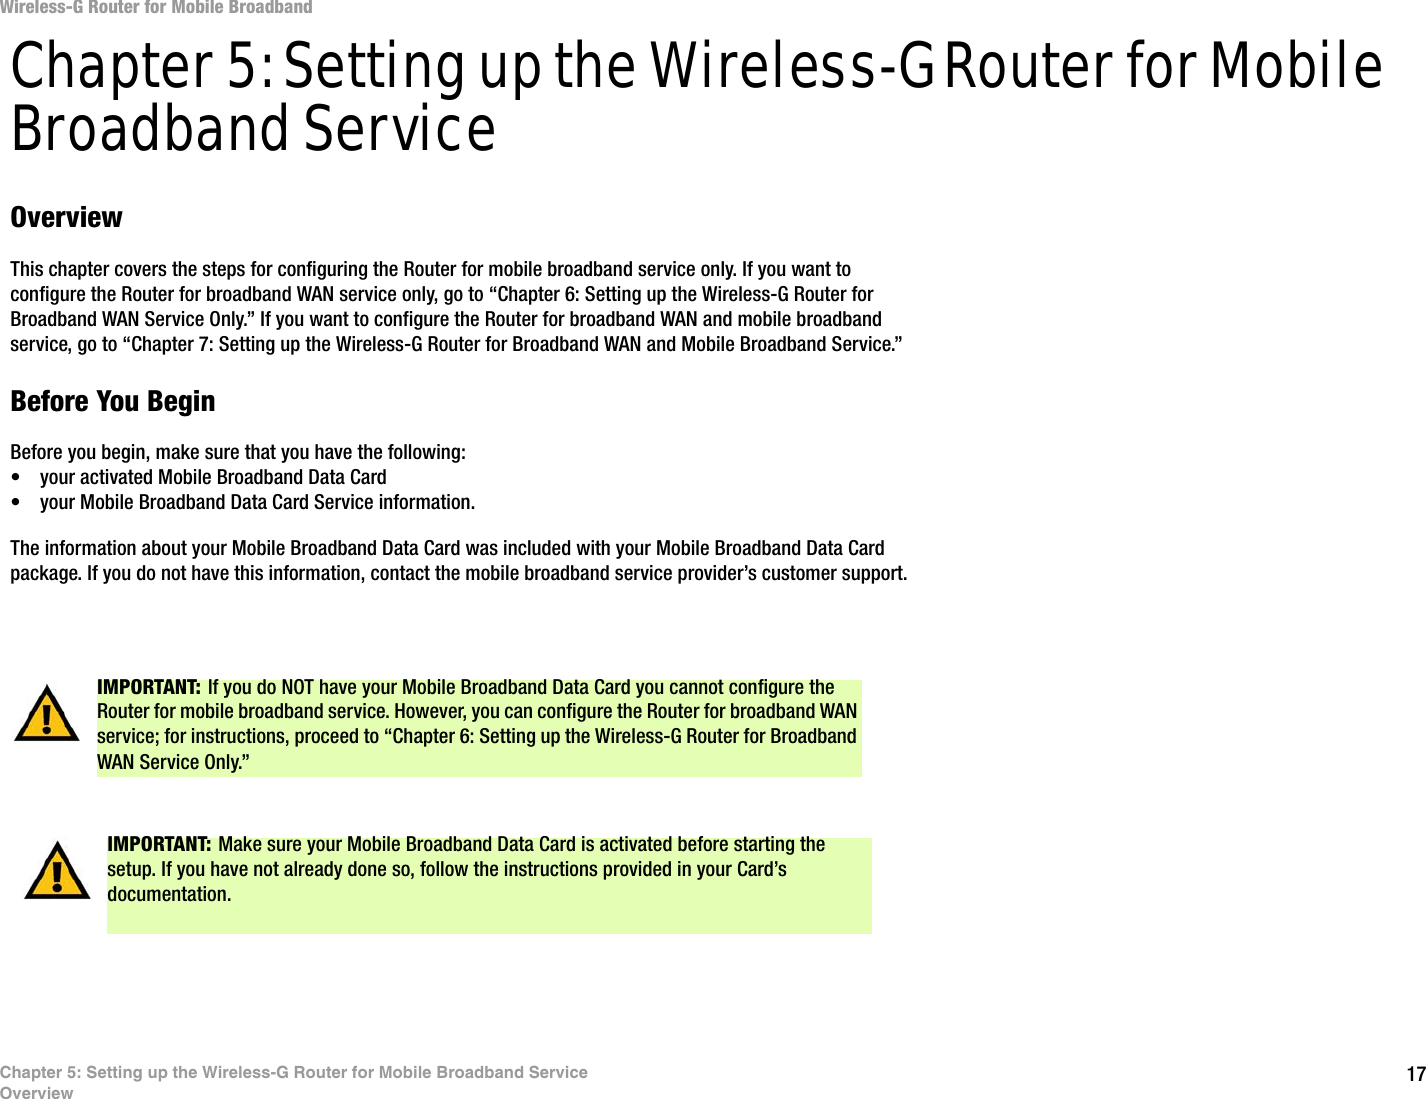 17Chapter 5: Setting up the Wireless-G Router for Mobile Broadband ServiceOverviewWireless-G Router for Mobile BroadbandChapter 5: Setting up the Wireless-G Router for Mobile Broadband ServiceOverviewThis chapter covers the steps for configuring the Router for mobile broadband service only. If you want to configure the Router for broadband WAN service only, go to “Chapter 6: Setting up the Wireless-G Router for Broadband WAN Service Only.” If you want to configure the Router for broadband WAN and mobile broadband service, go to “Chapter 7: Setting up the Wireless-G Router for Broadband WAN and Mobile Broadband Service.”Before You BeginBefore you begin, make sure that you have the following:• your activated Mobile Broadband Data Card• your Mobile Broadband Data Card Service information.The information about your Mobile Broadband Data Card was included with your Mobile Broadband Data Card package. If you do not have this information, contact the mobile broadband service provider’s customer support.IMPORTANT: If you do NOT have your Mobile Broadband Data Card you cannot configure the Router for mobile broadband service. However, you can configure the Router for broadband WAN service; for instructions, proceed to “Chapter 6: Setting up the Wireless-G Router for Broadband WAN Service Only.” IMPORTANT: Make sure your Mobile Broadband Data Card is activated before starting the setup. If you have not already done so, follow the instructions provided in your Card’s documentation.